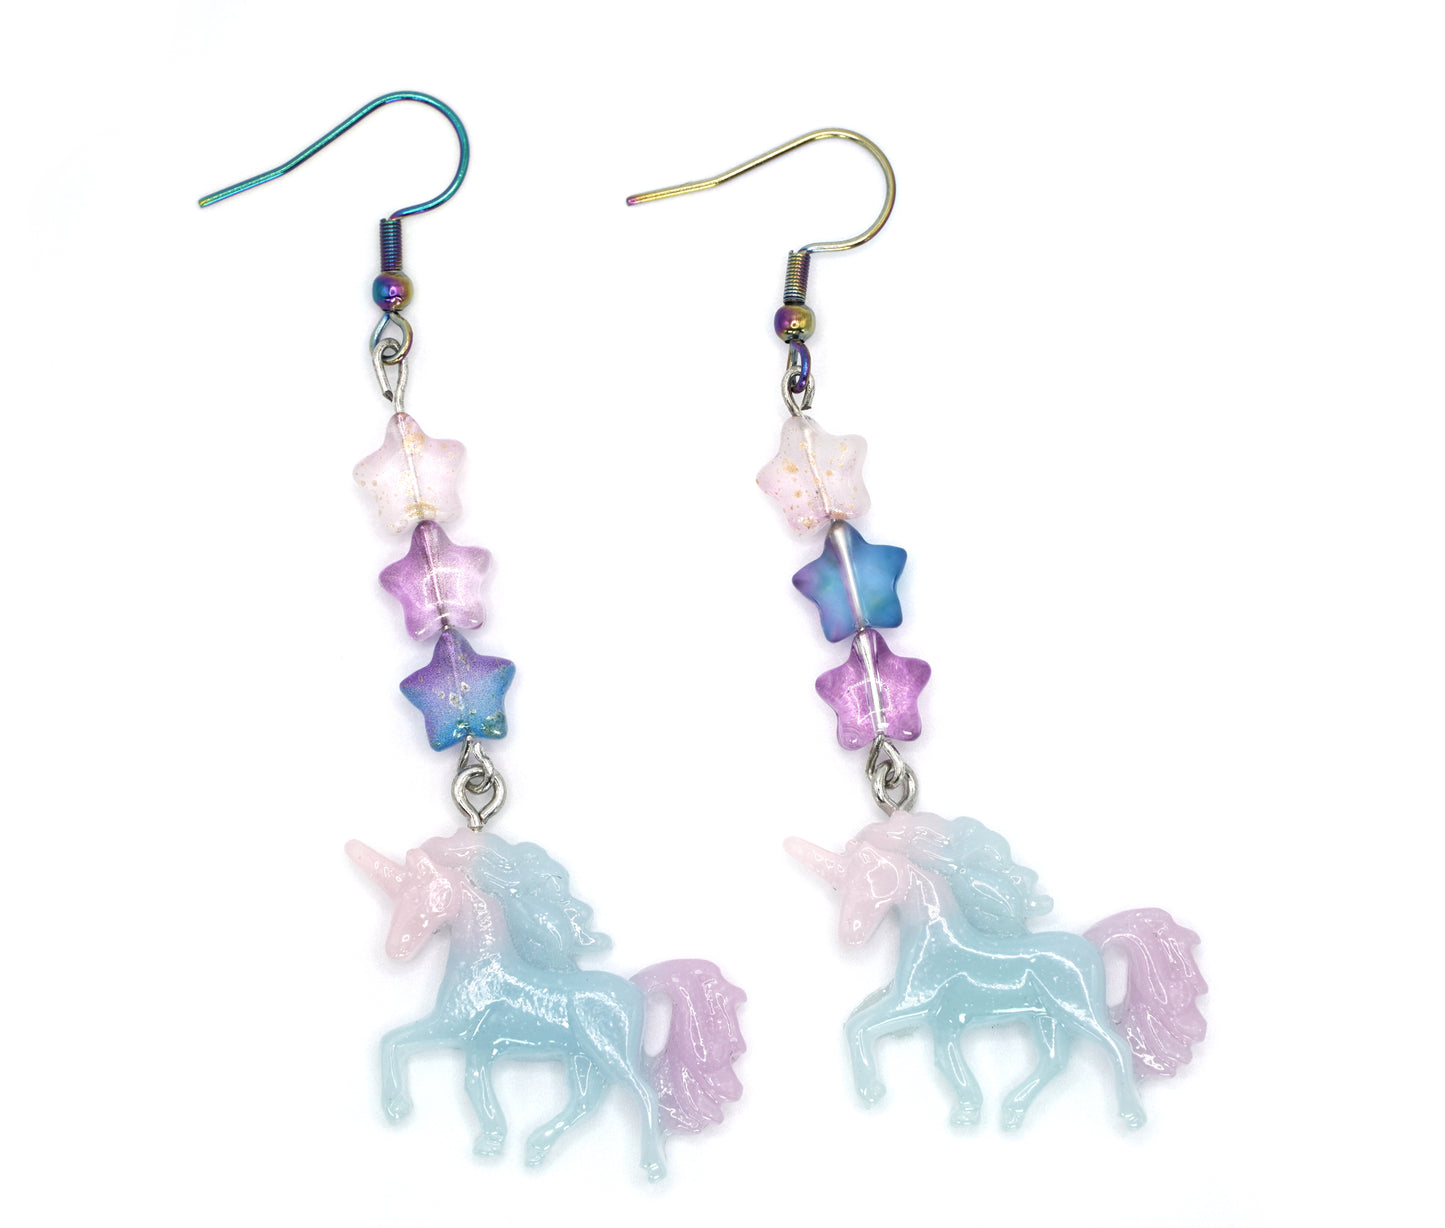 Unicorn Fairycore Earrings, Mystical Rainbow Dangles, Enchanted Forest Jewelry, Fairy Gift